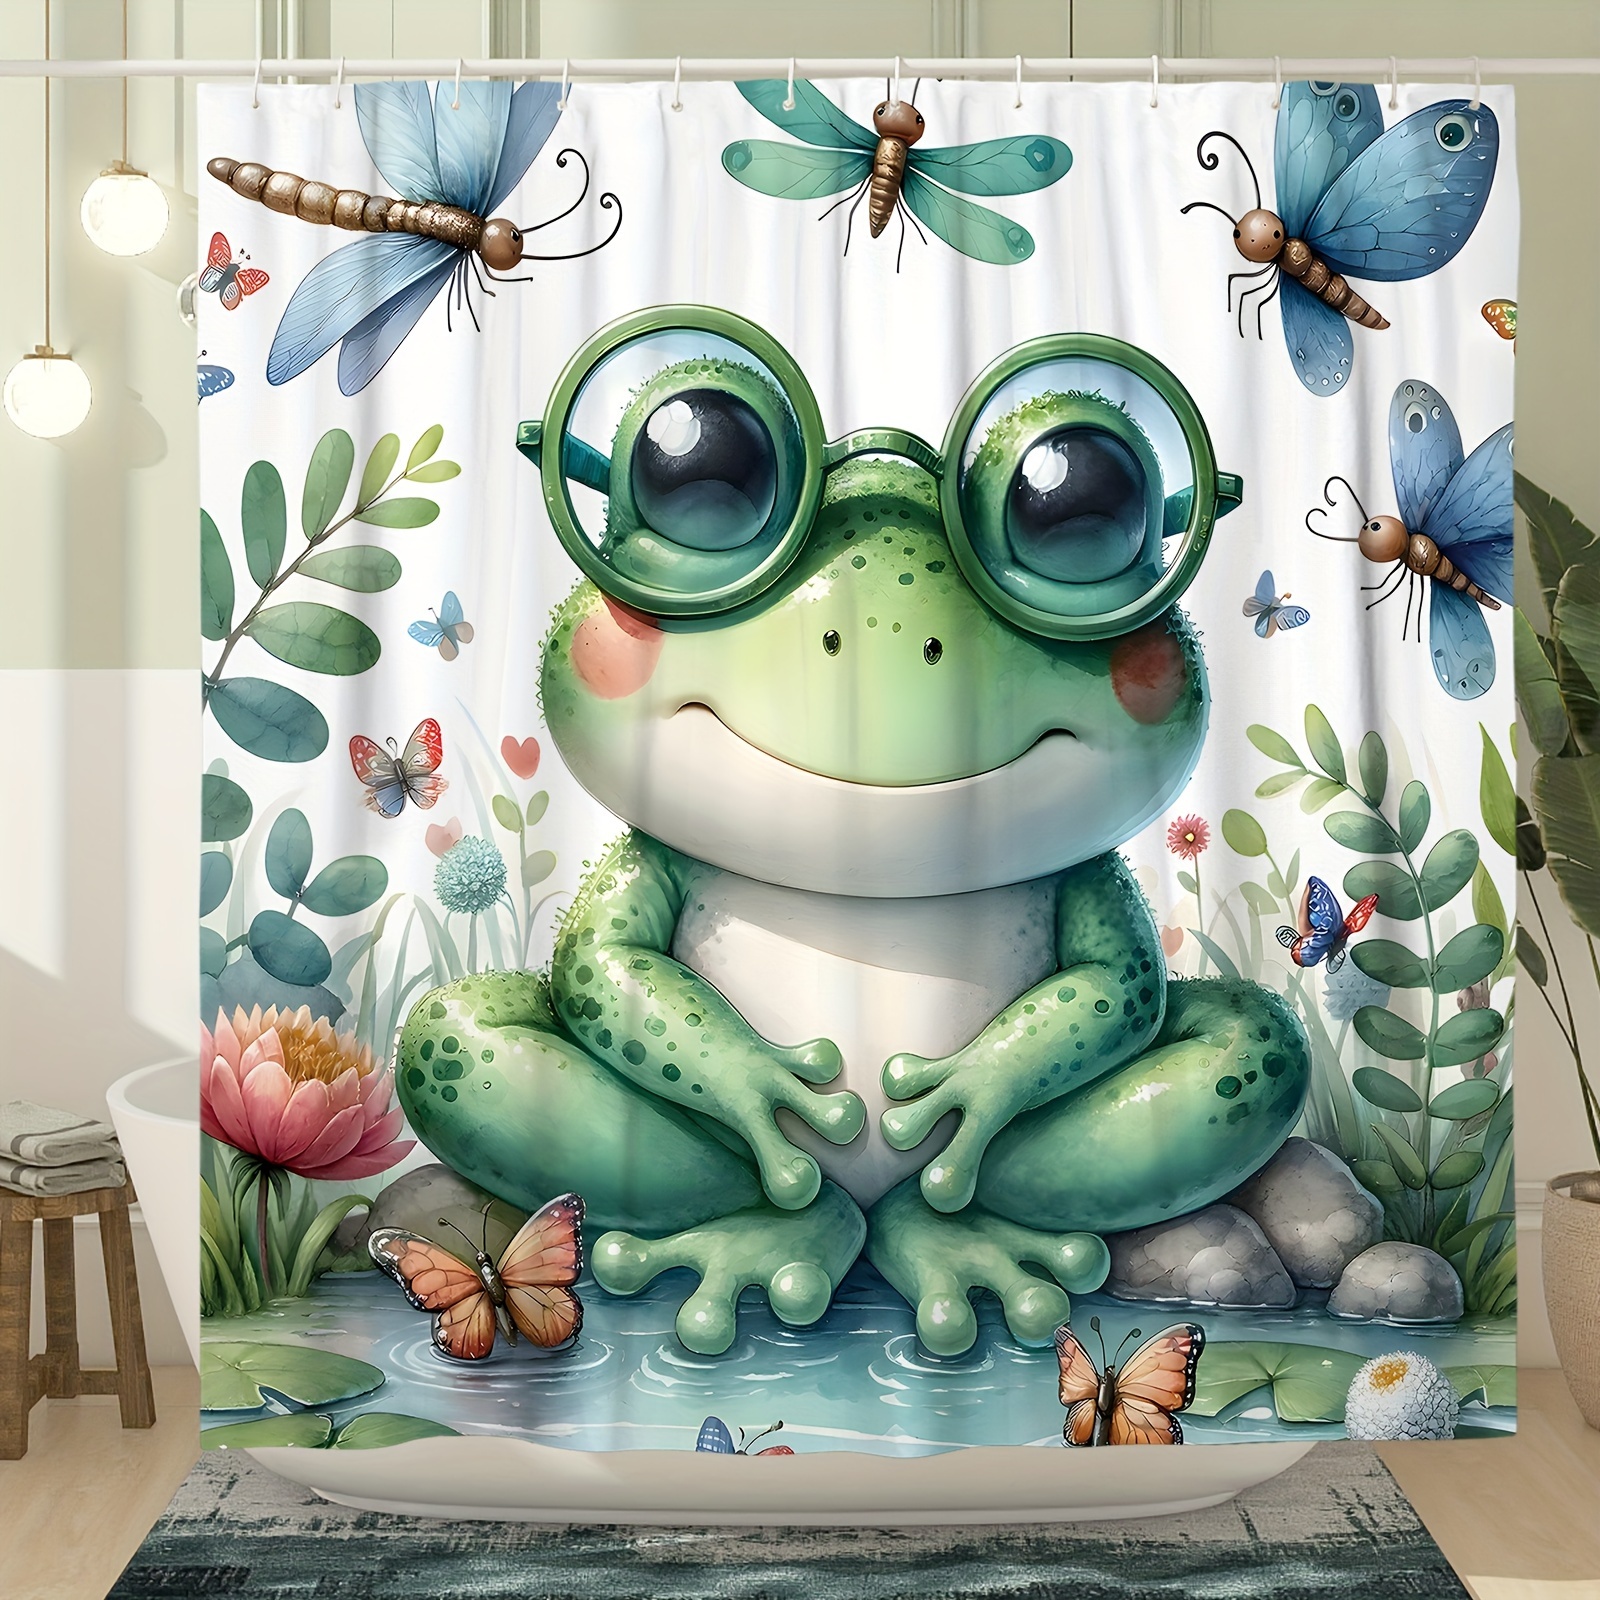 

1pc Cute Frog & Dragonfly Print Shower Curtain, Polyester, Waterproof Bathroom Decor With 12 Hooks, Machine Washable, Blue And Green Garden Theme For Bath Or Tub